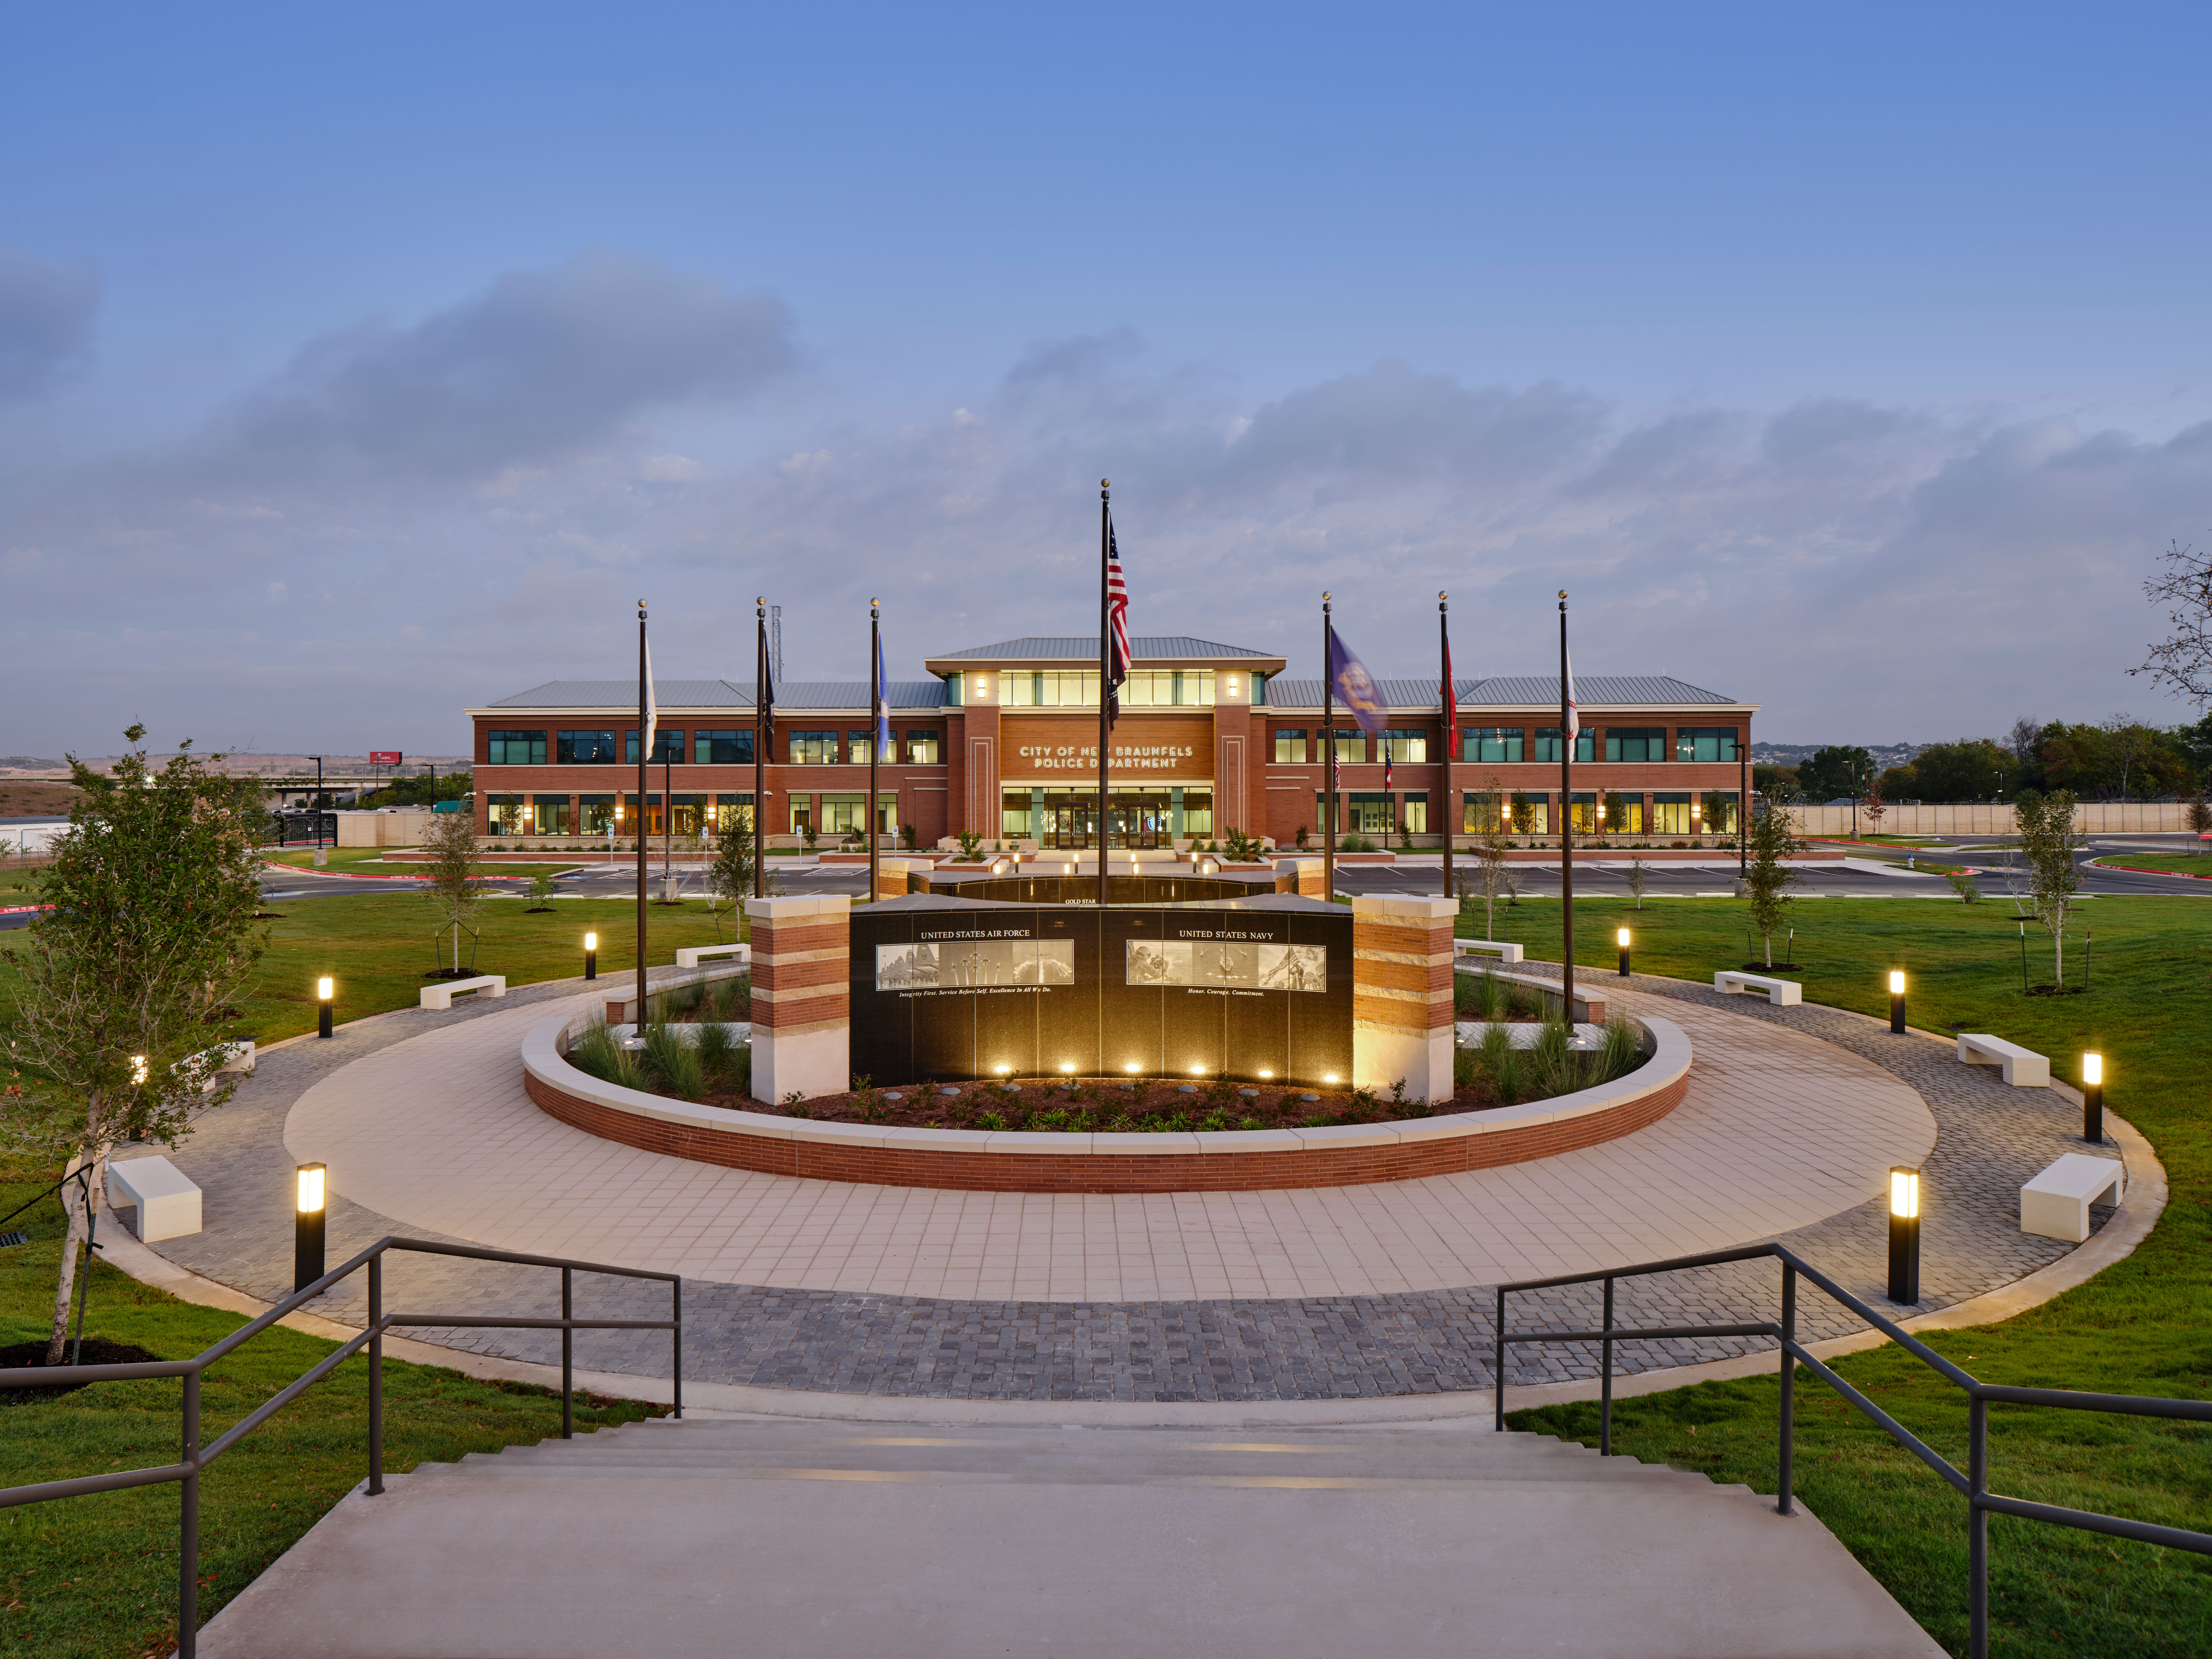 New Braunfels Police Headquarters and Veterans Memorial